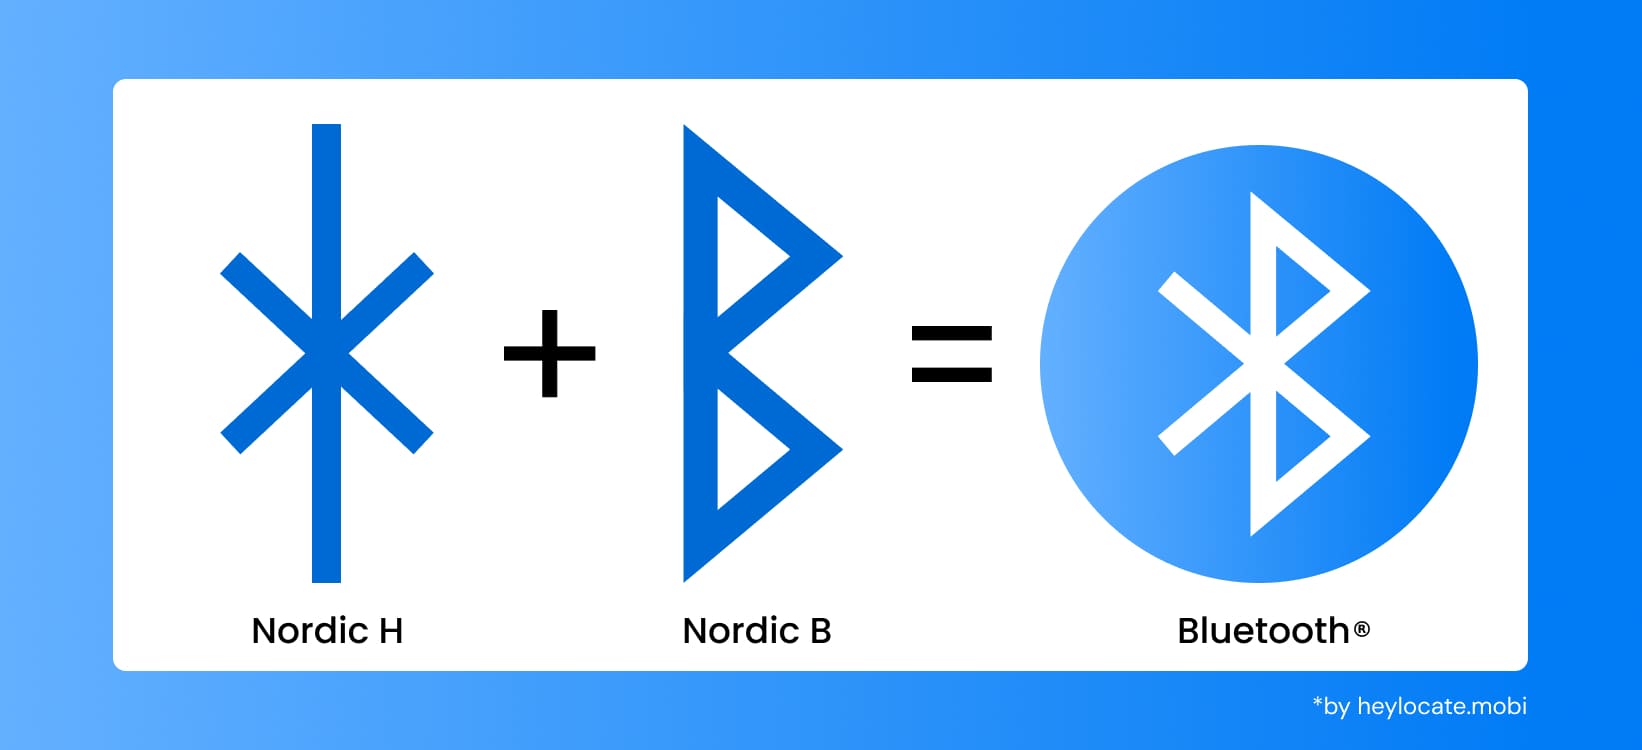 An image illustrating the origin of the Bluetooth symbol, which combines the Scandinavian runes "H" and "B"